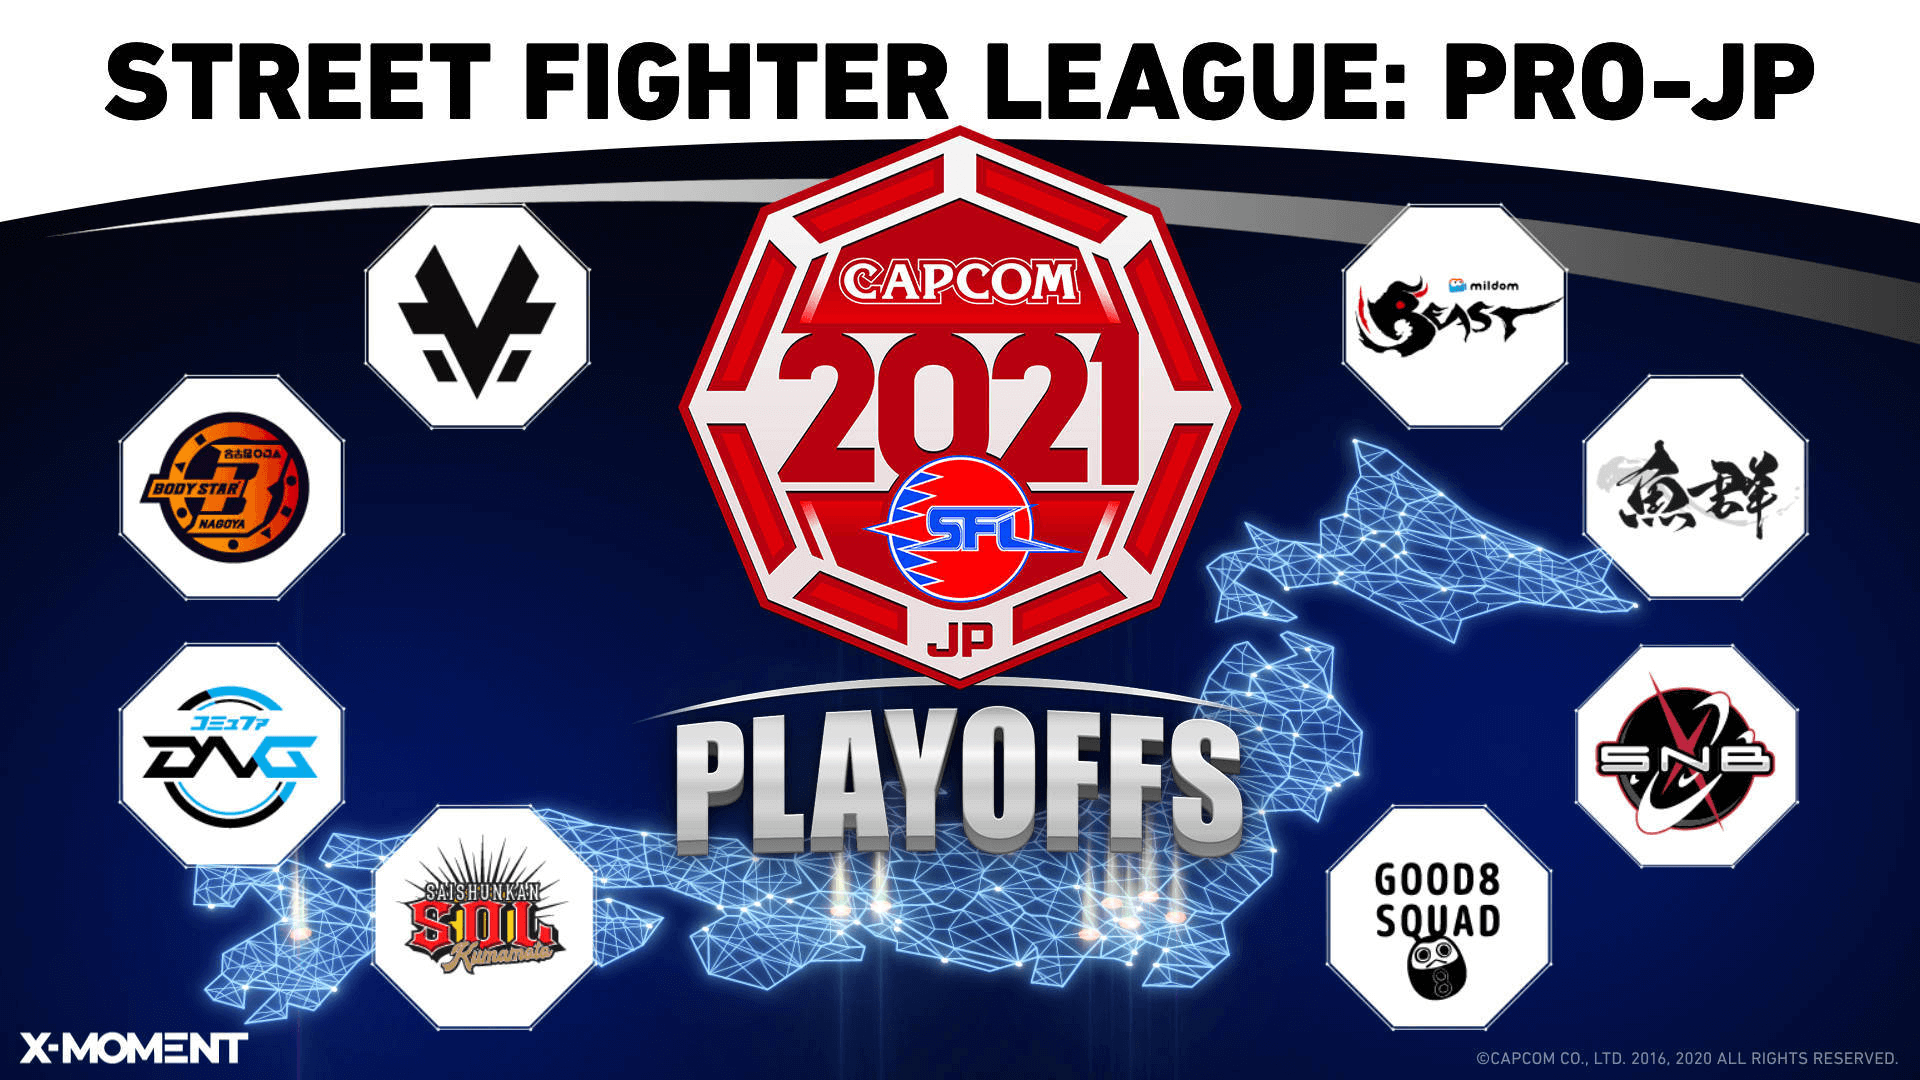 Street Fighter League Pro-JP: On a Threshold of Playoffs